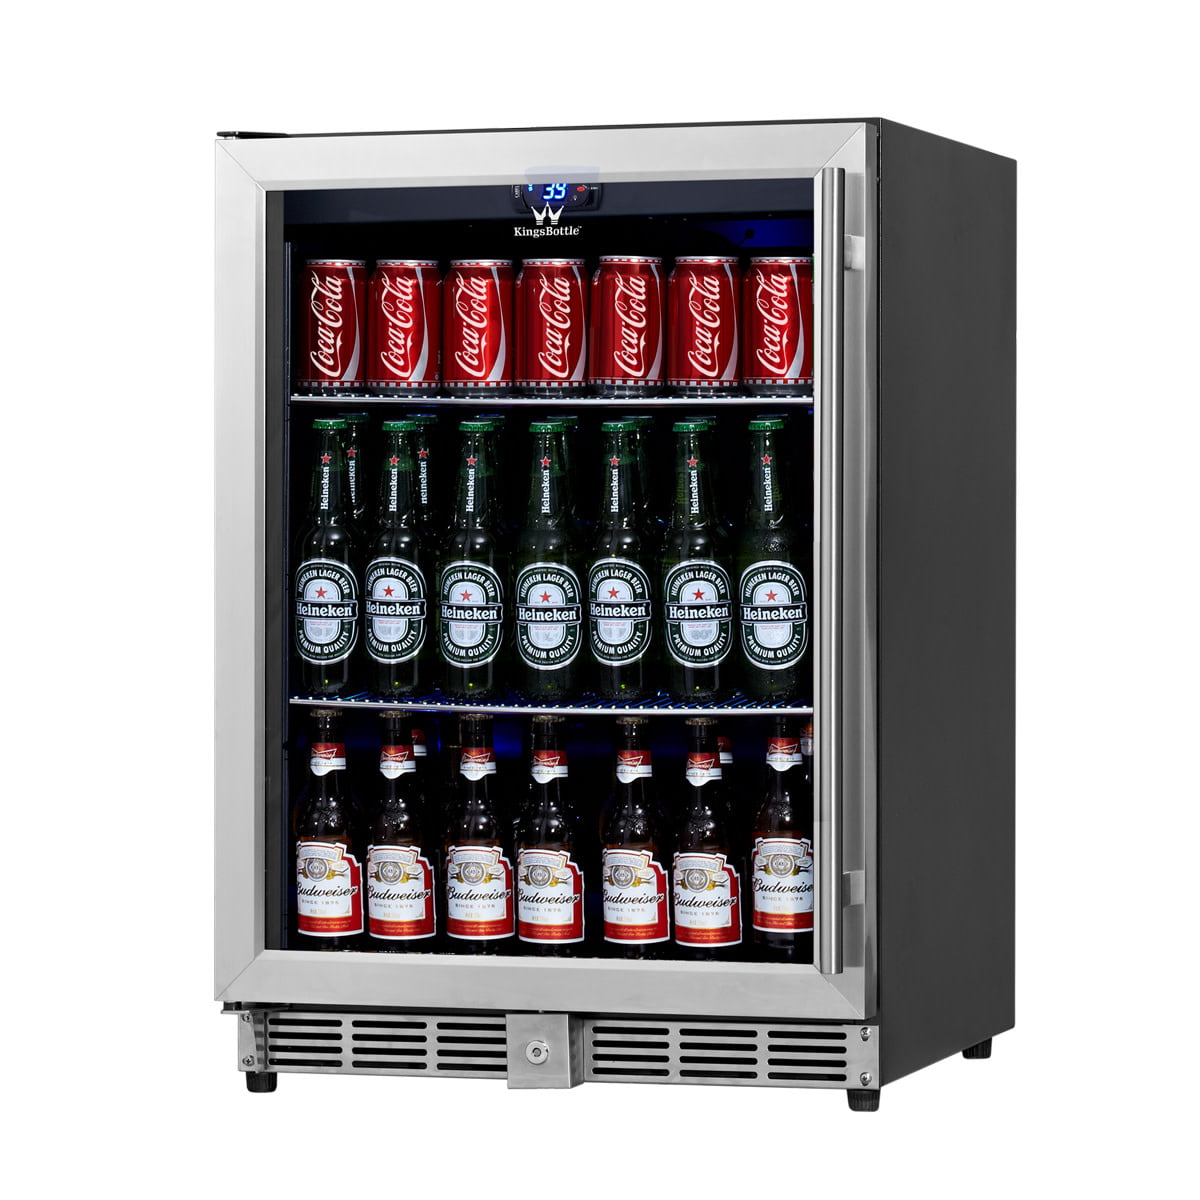 63L Mini Fridge Glass Door for Bedrooms Beer Wine Drinks Fridge Freezer for Bar Home Kitchen Office Black Small Table Top Fridge with LED Light and Lock and Key